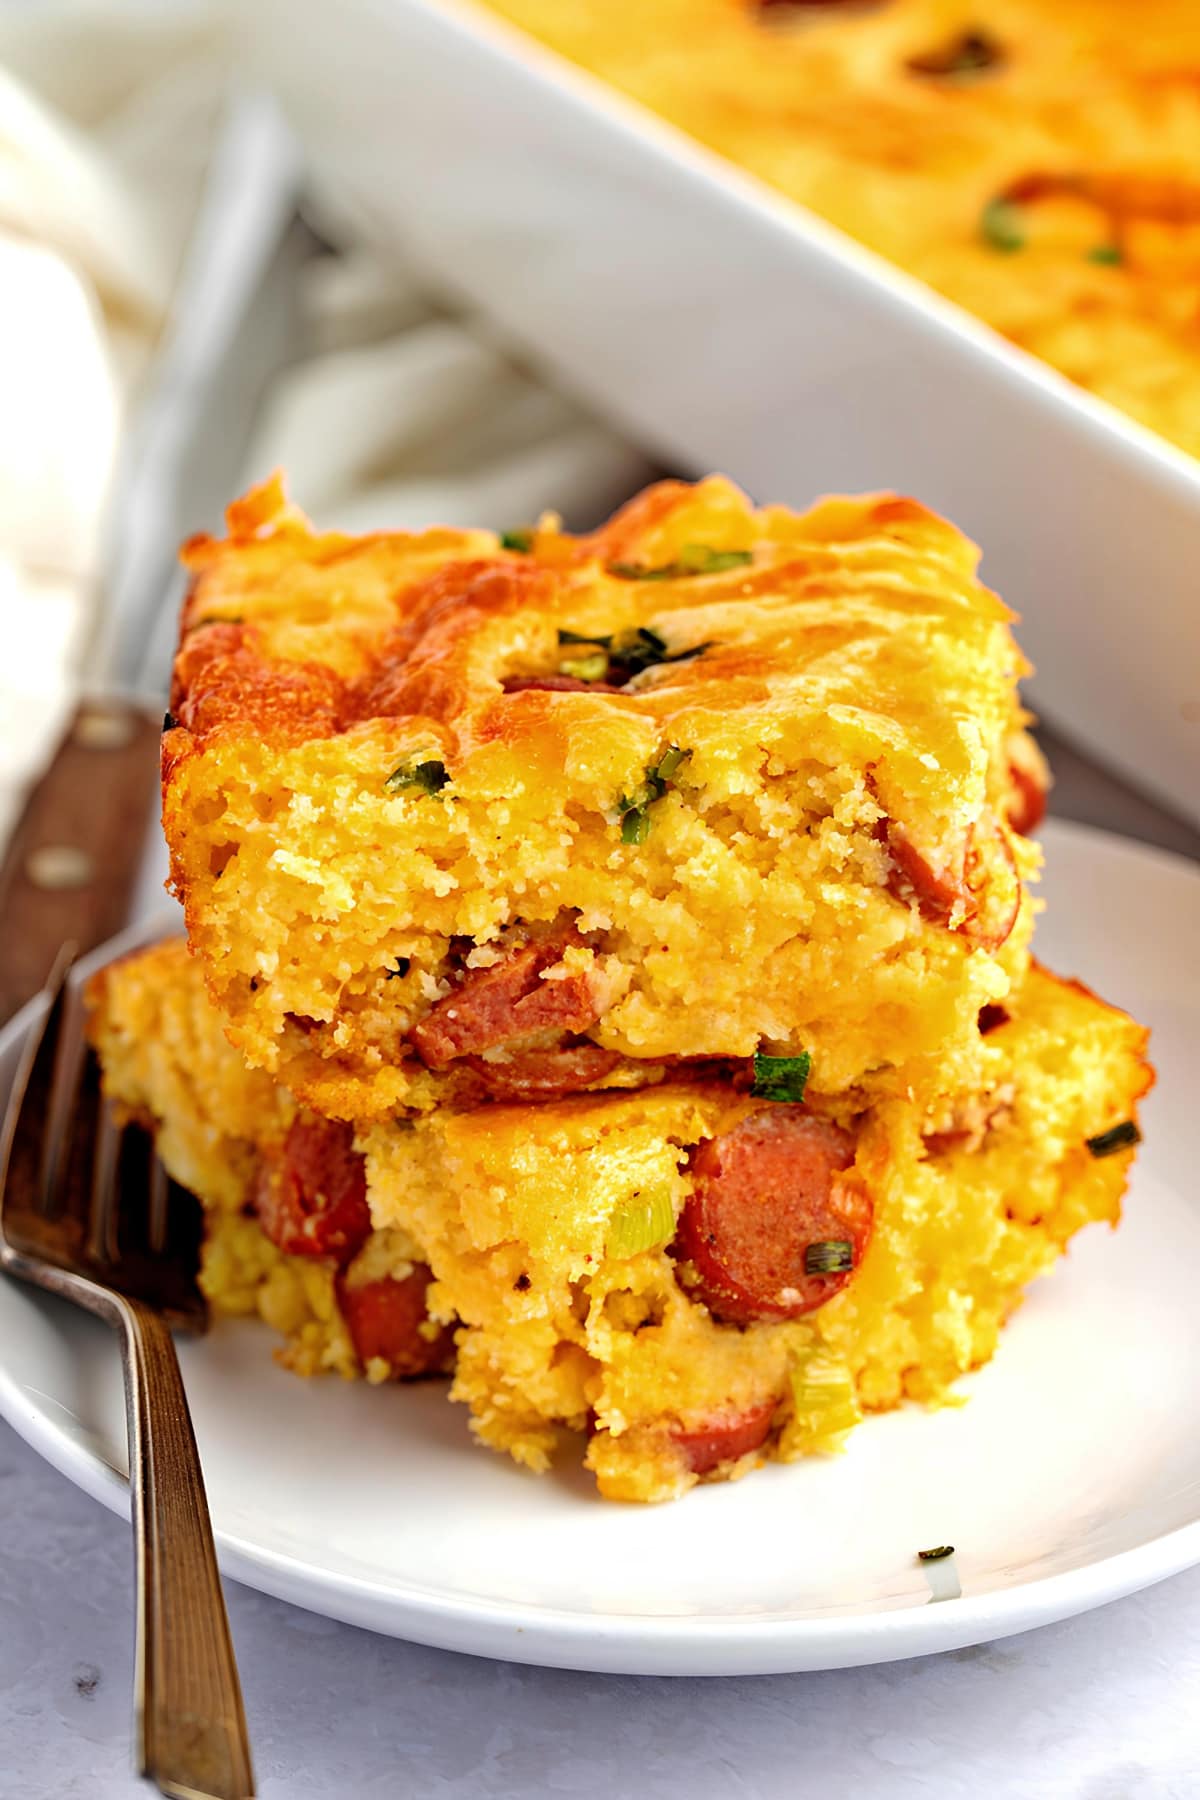 Hearty and Scrumptious Corn Dog Casserole in a Plate